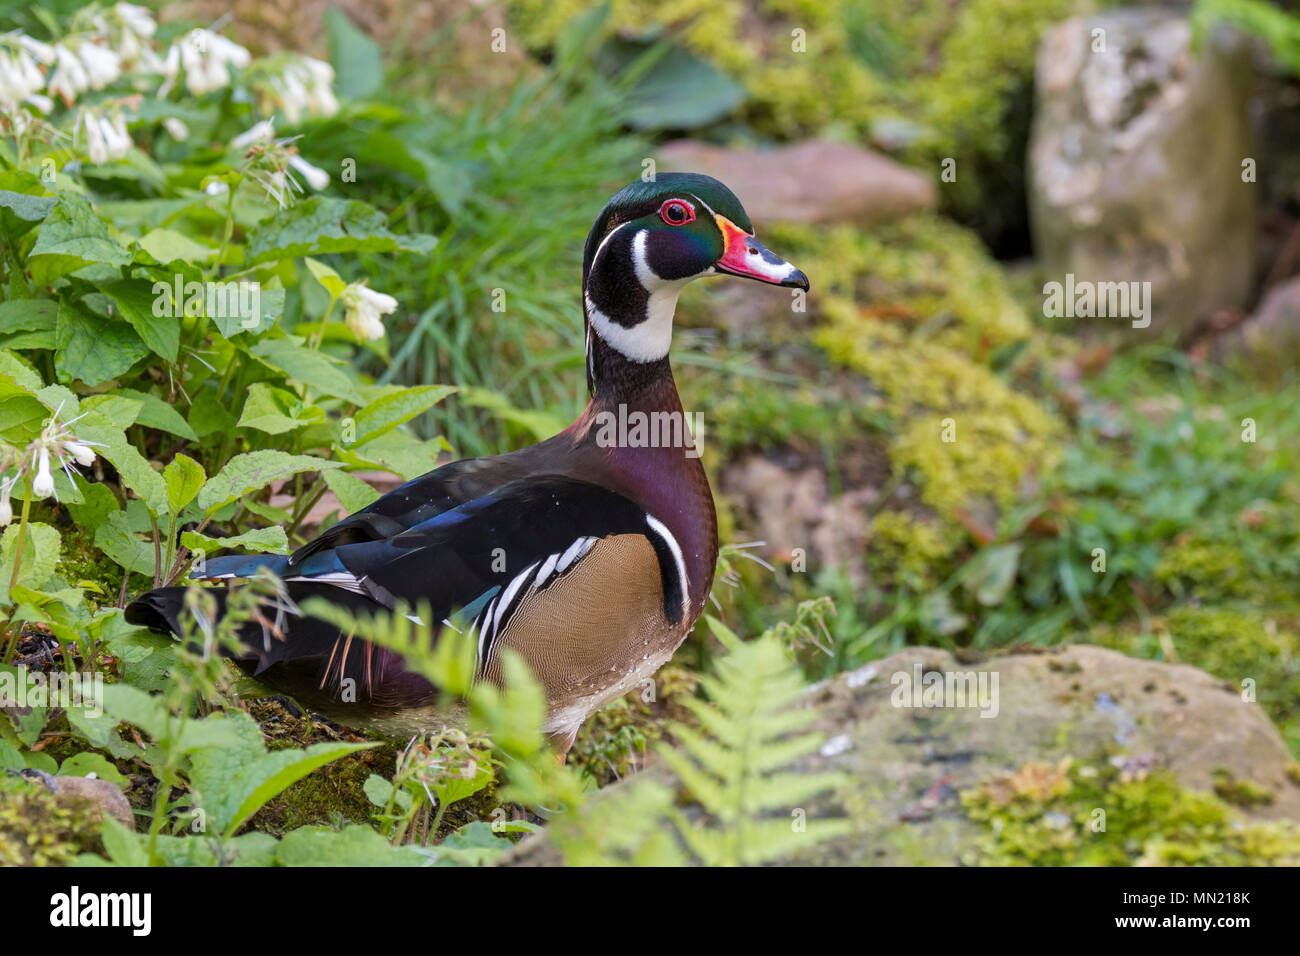 Wood duck / Carolina duck (Aix sponsa / Anas sponsa) male resting on land, colorful perching duck native to North America Stock Photo